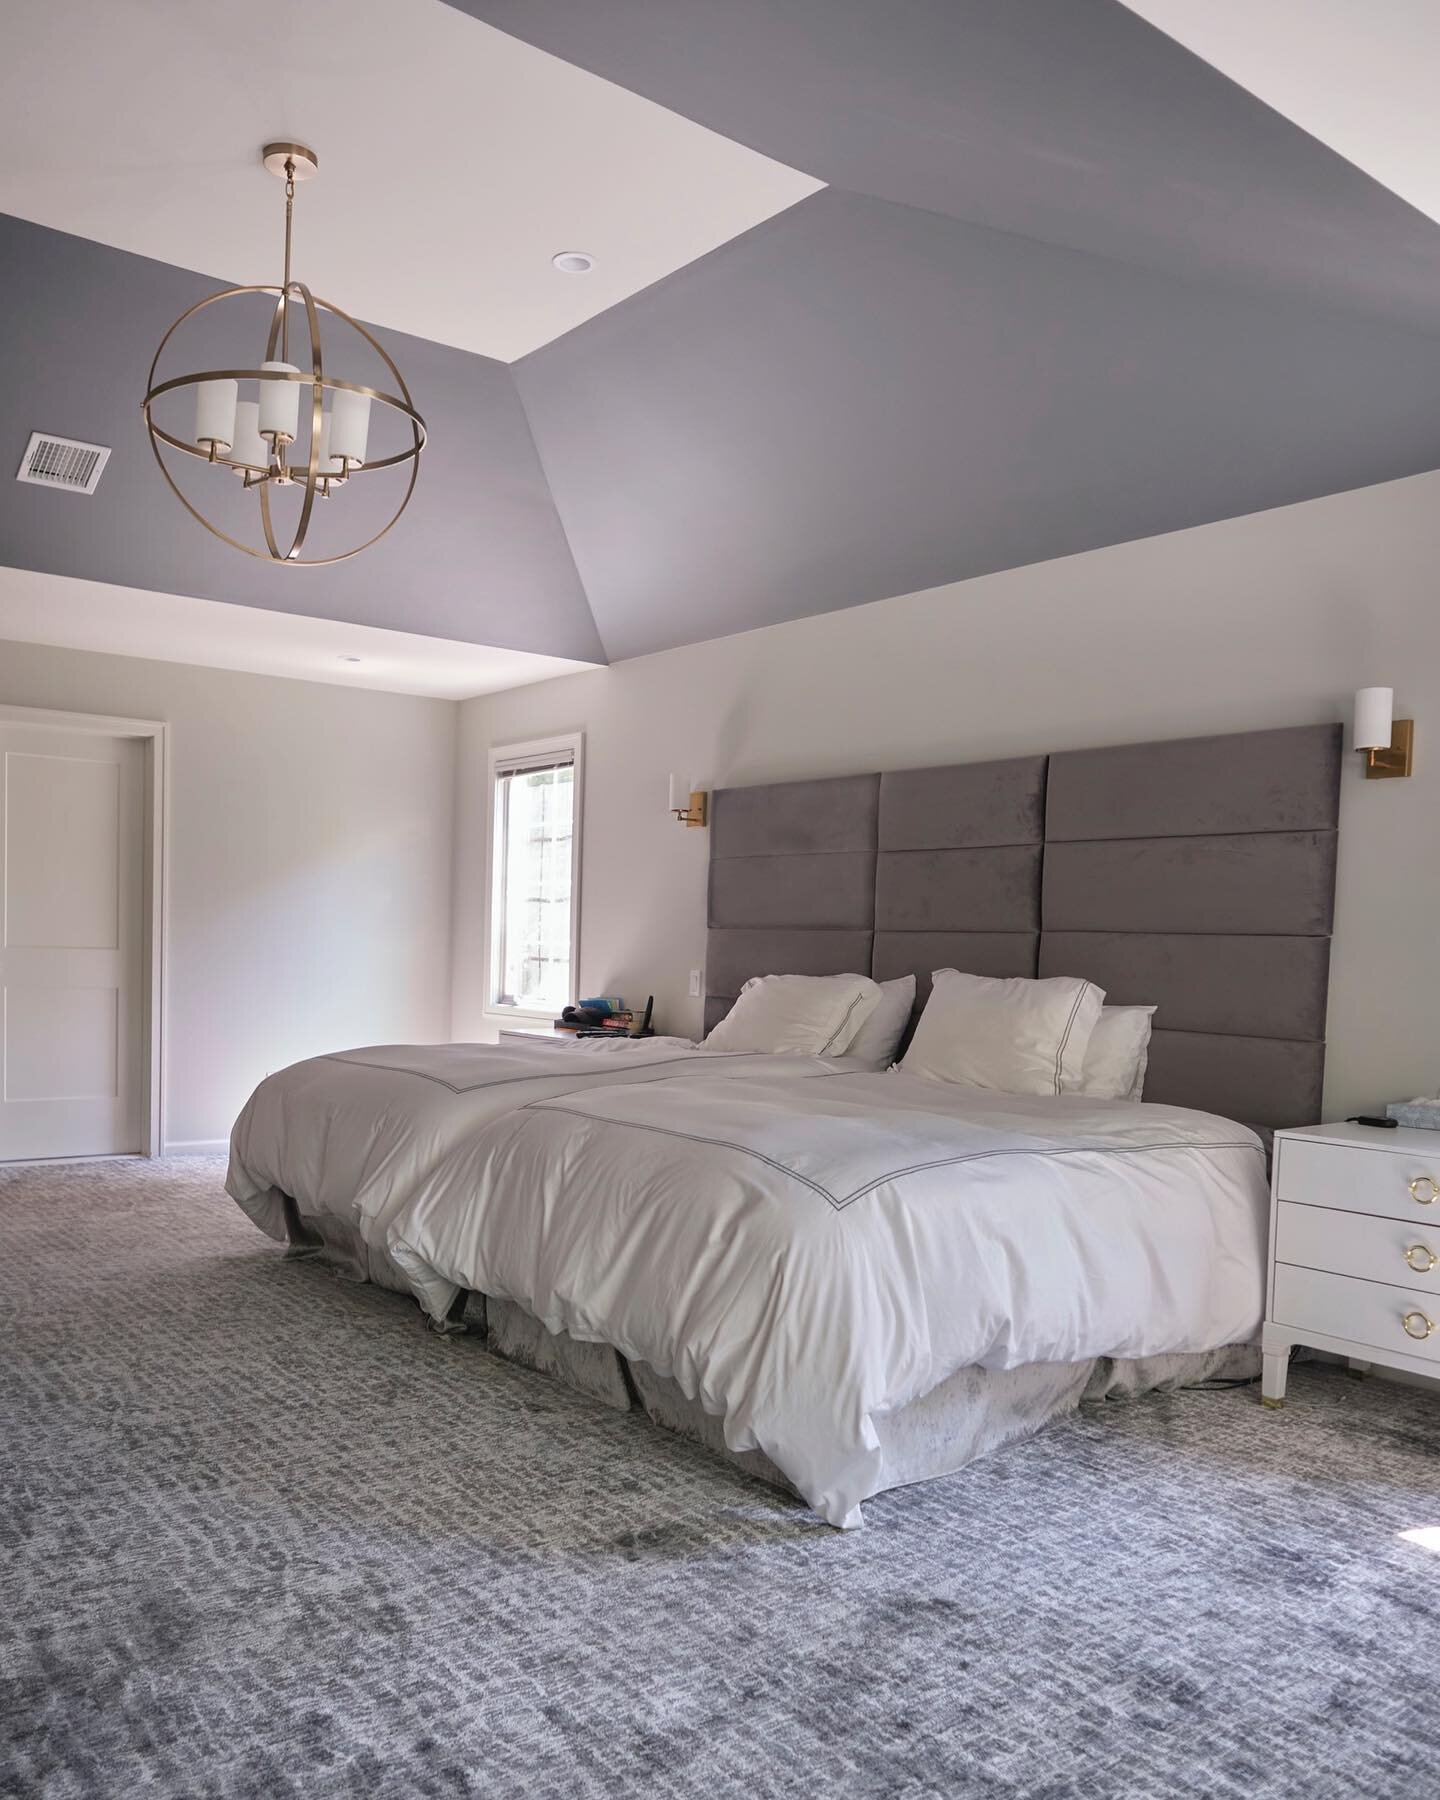 Grand and Grey master suite with beautiful tray ceilings
Photo by @aneyeforart 
&bull;
&bull;
&bull;
#grand #grey #grandandgrey #masterbedroom #mastersuite #vaultedceiling #tuftedbed #carpet #luxury #lux #luxurylifestyle #luxuryhomes #custom #customm